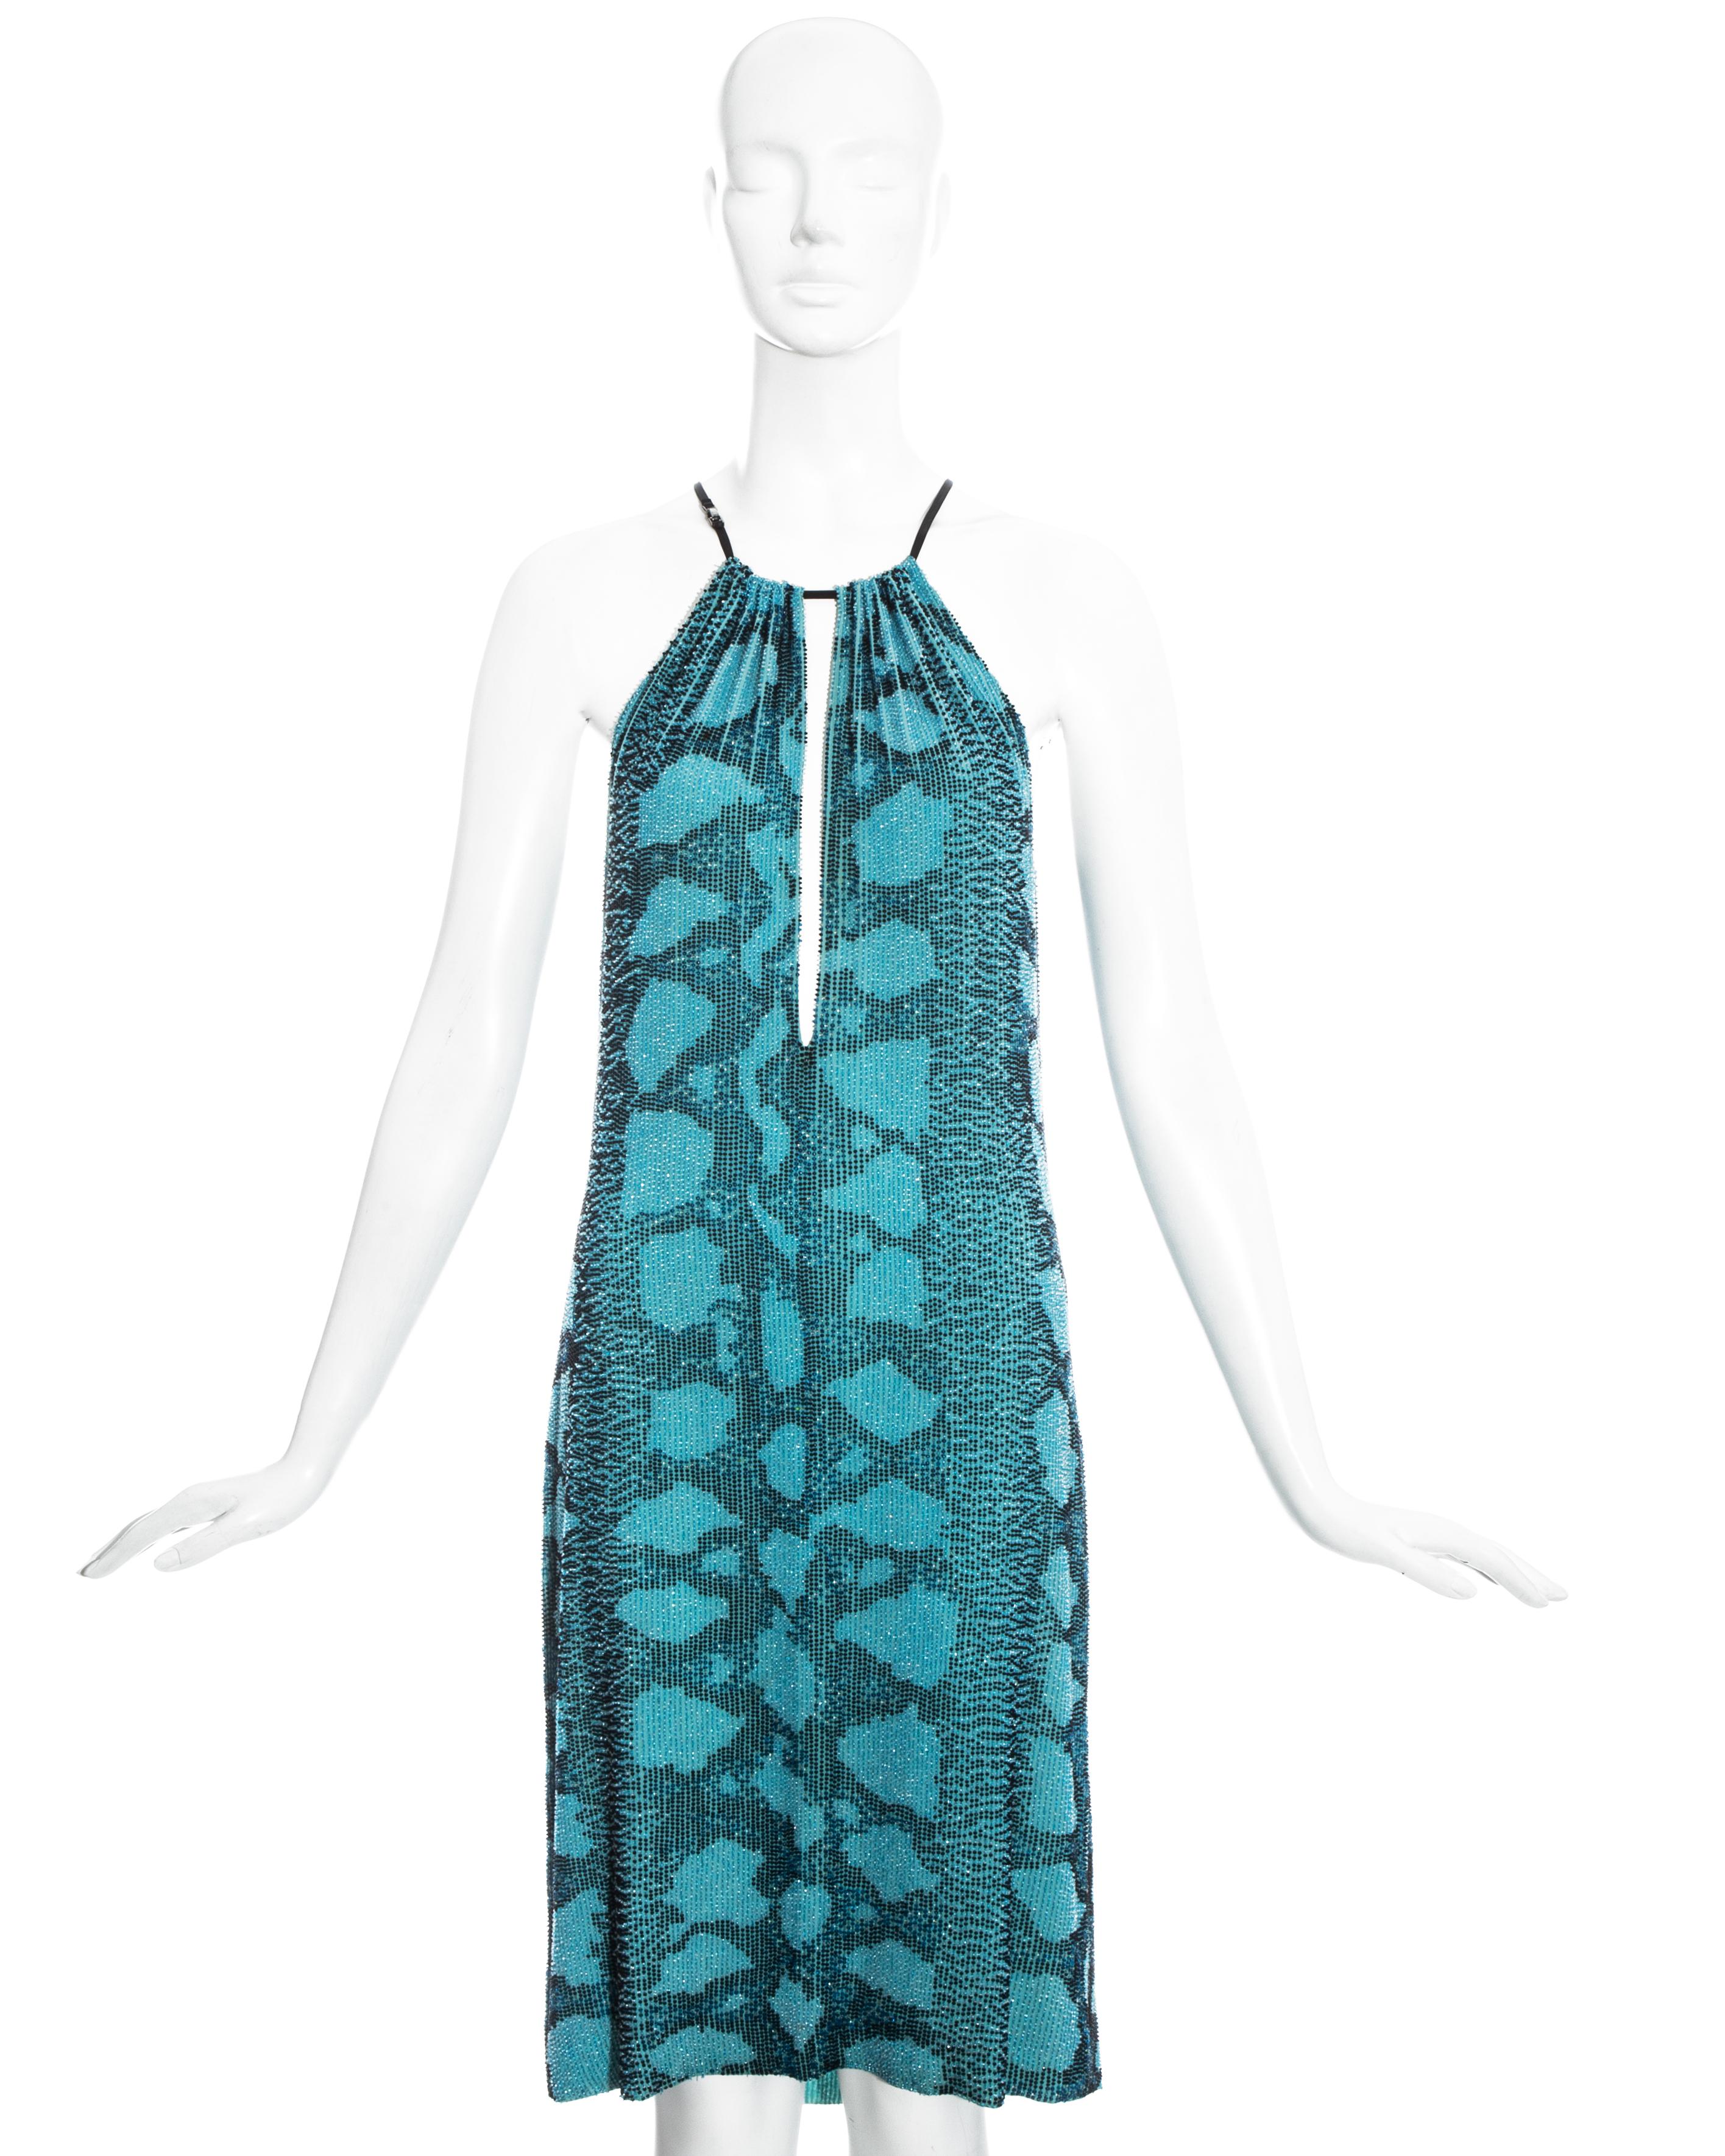 Gucci by Tom Ford aqua blue beaded evening dress with plunging neckline, silk lining and black leather shoulder strap with Gucci stamped metal clasp.

Spring-Summer 2000